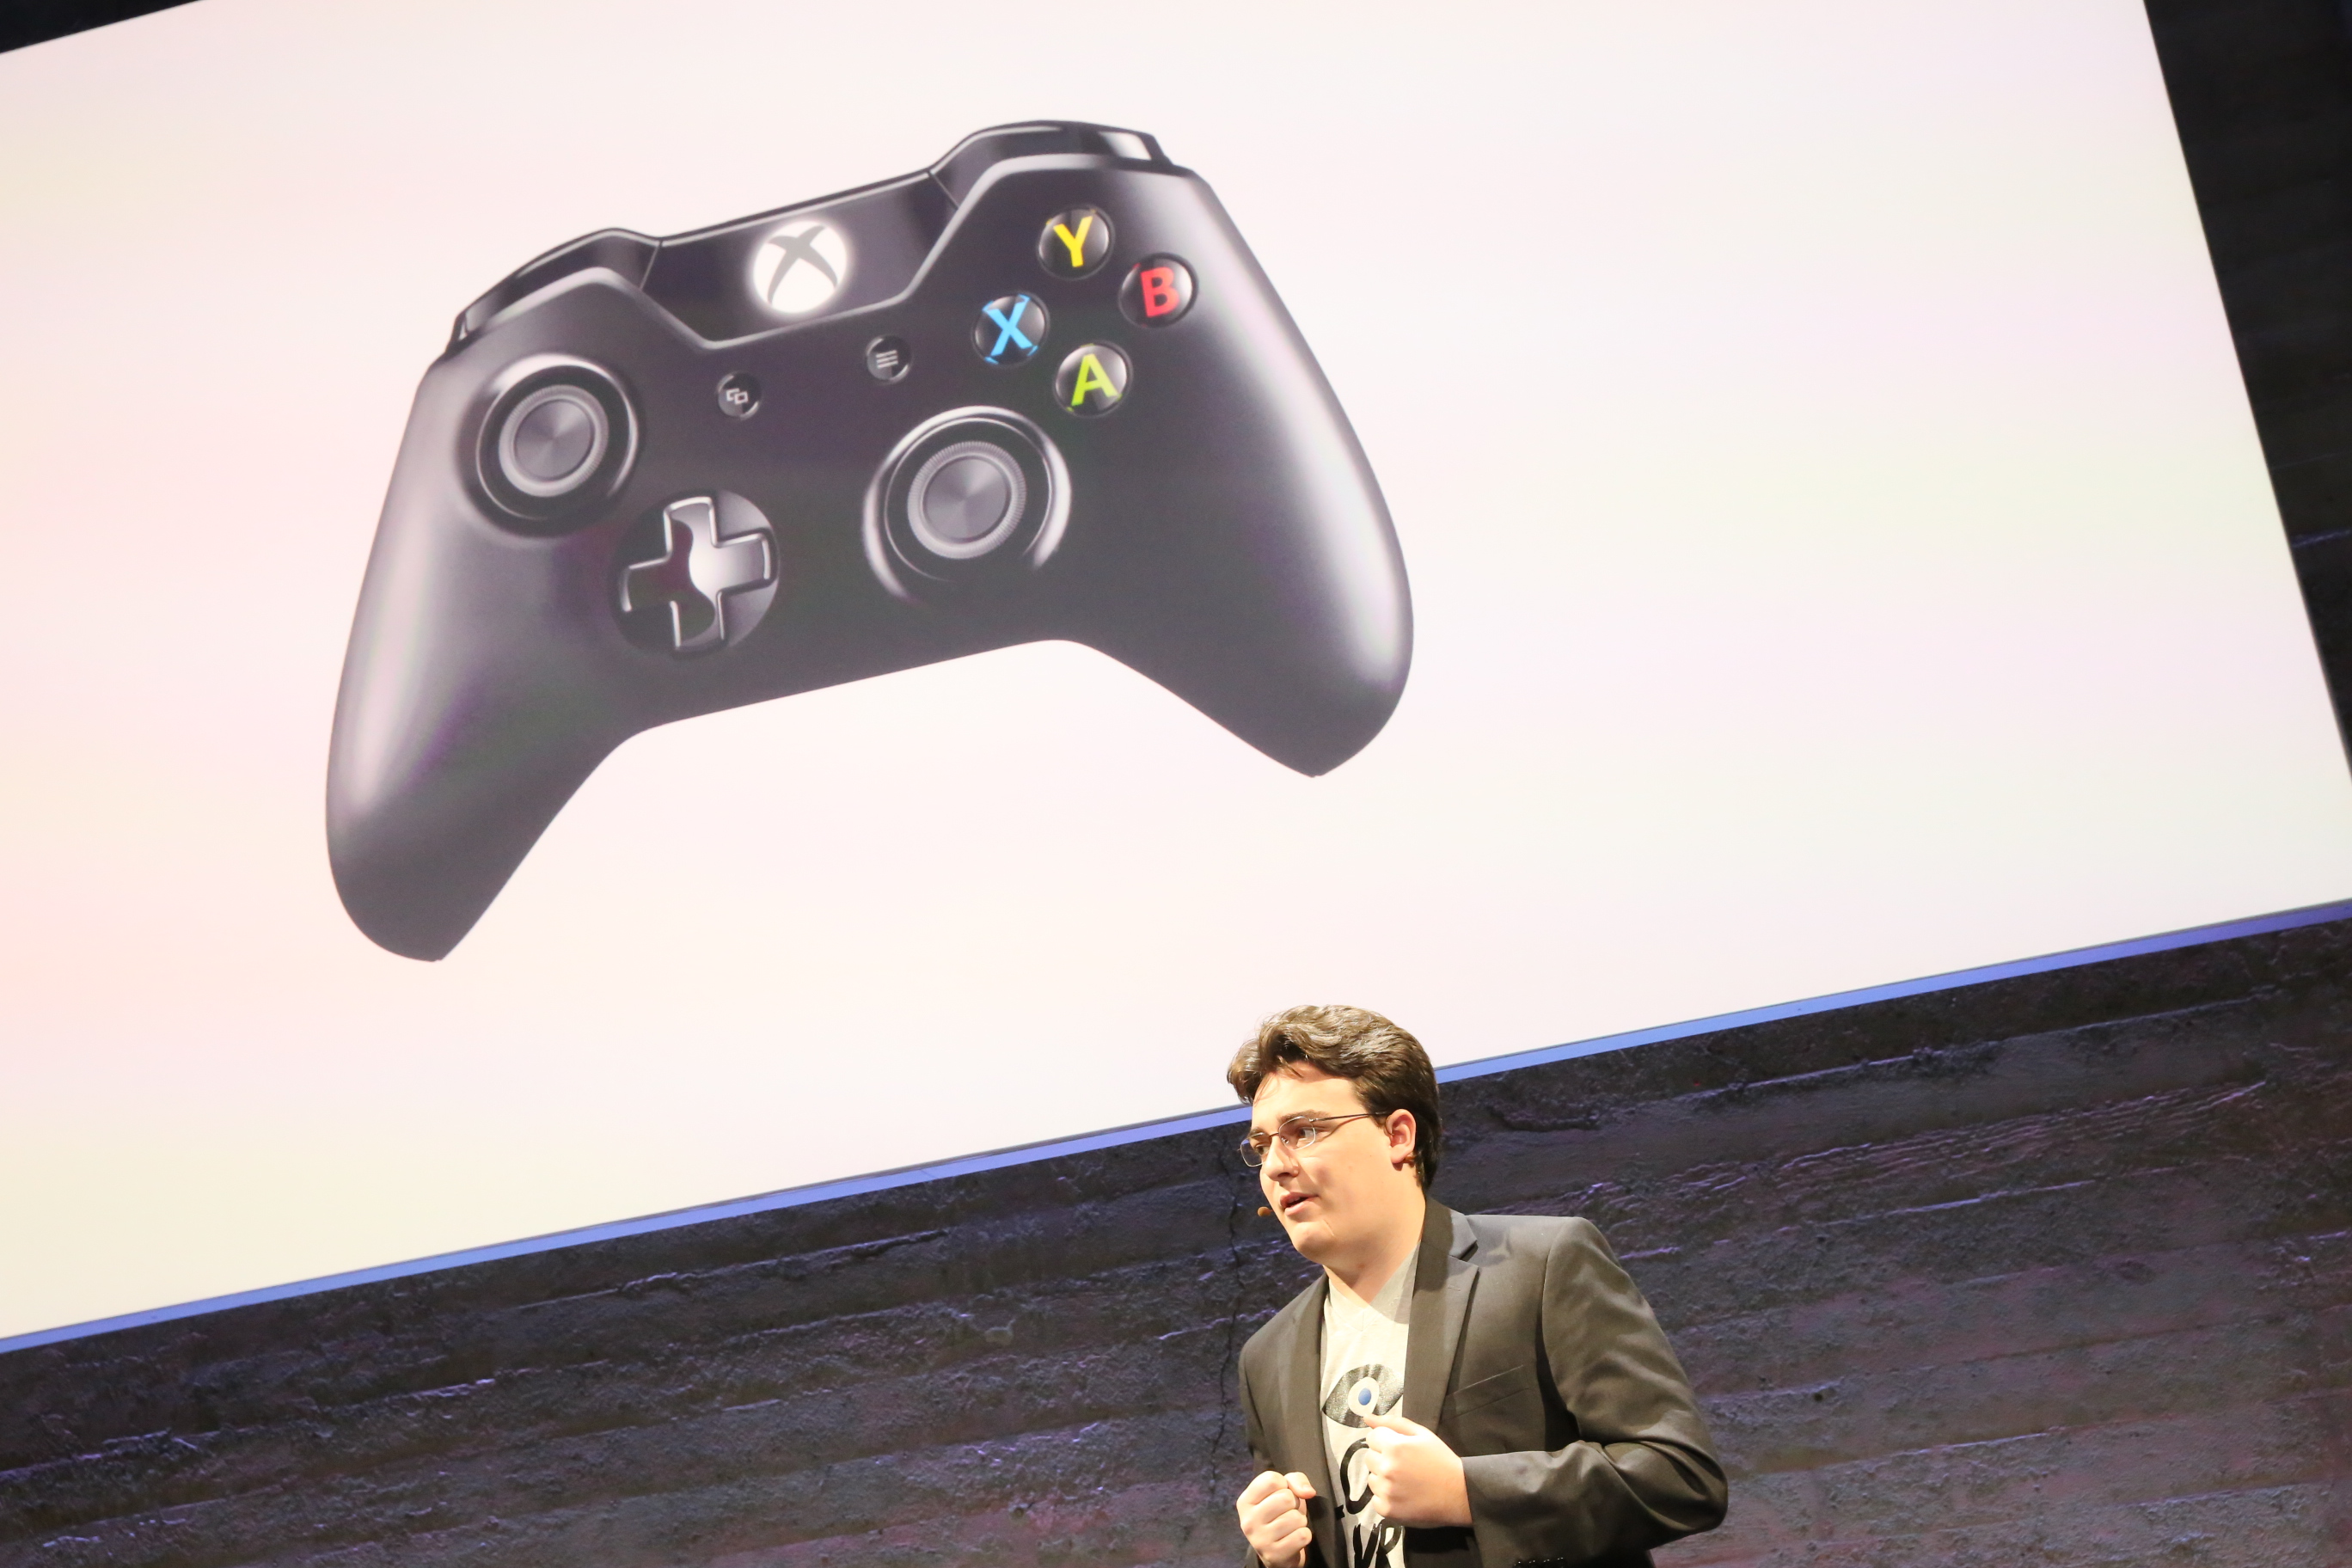 Microsoft is a key partner for the Oculus Rift launch, since an Xbox One controller is bundled with every unit.